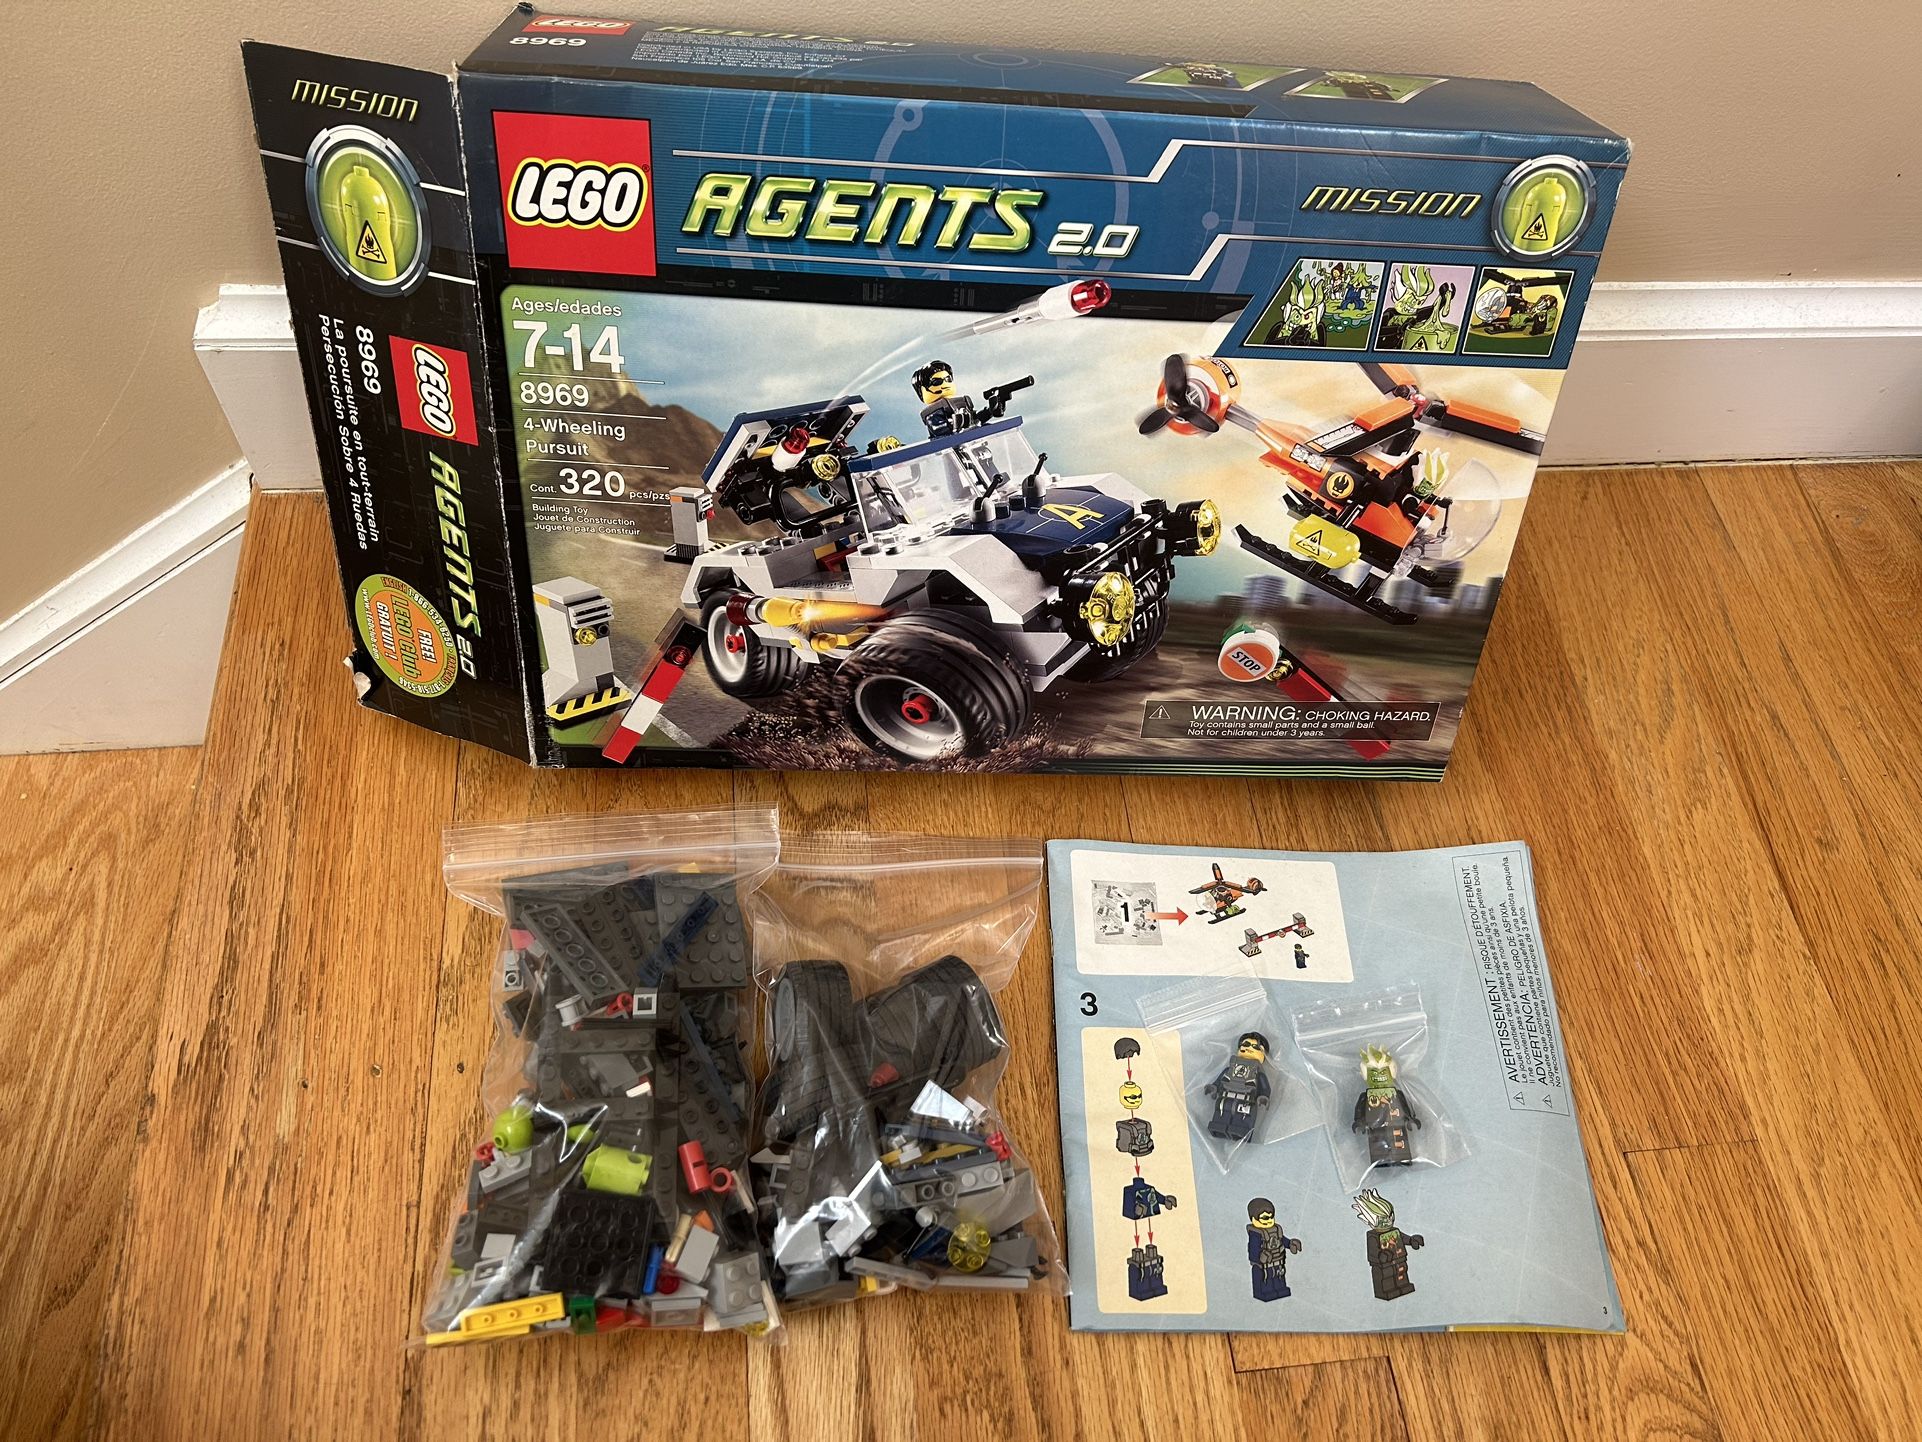 Lego Agents 8969 COMPLETE SET USED